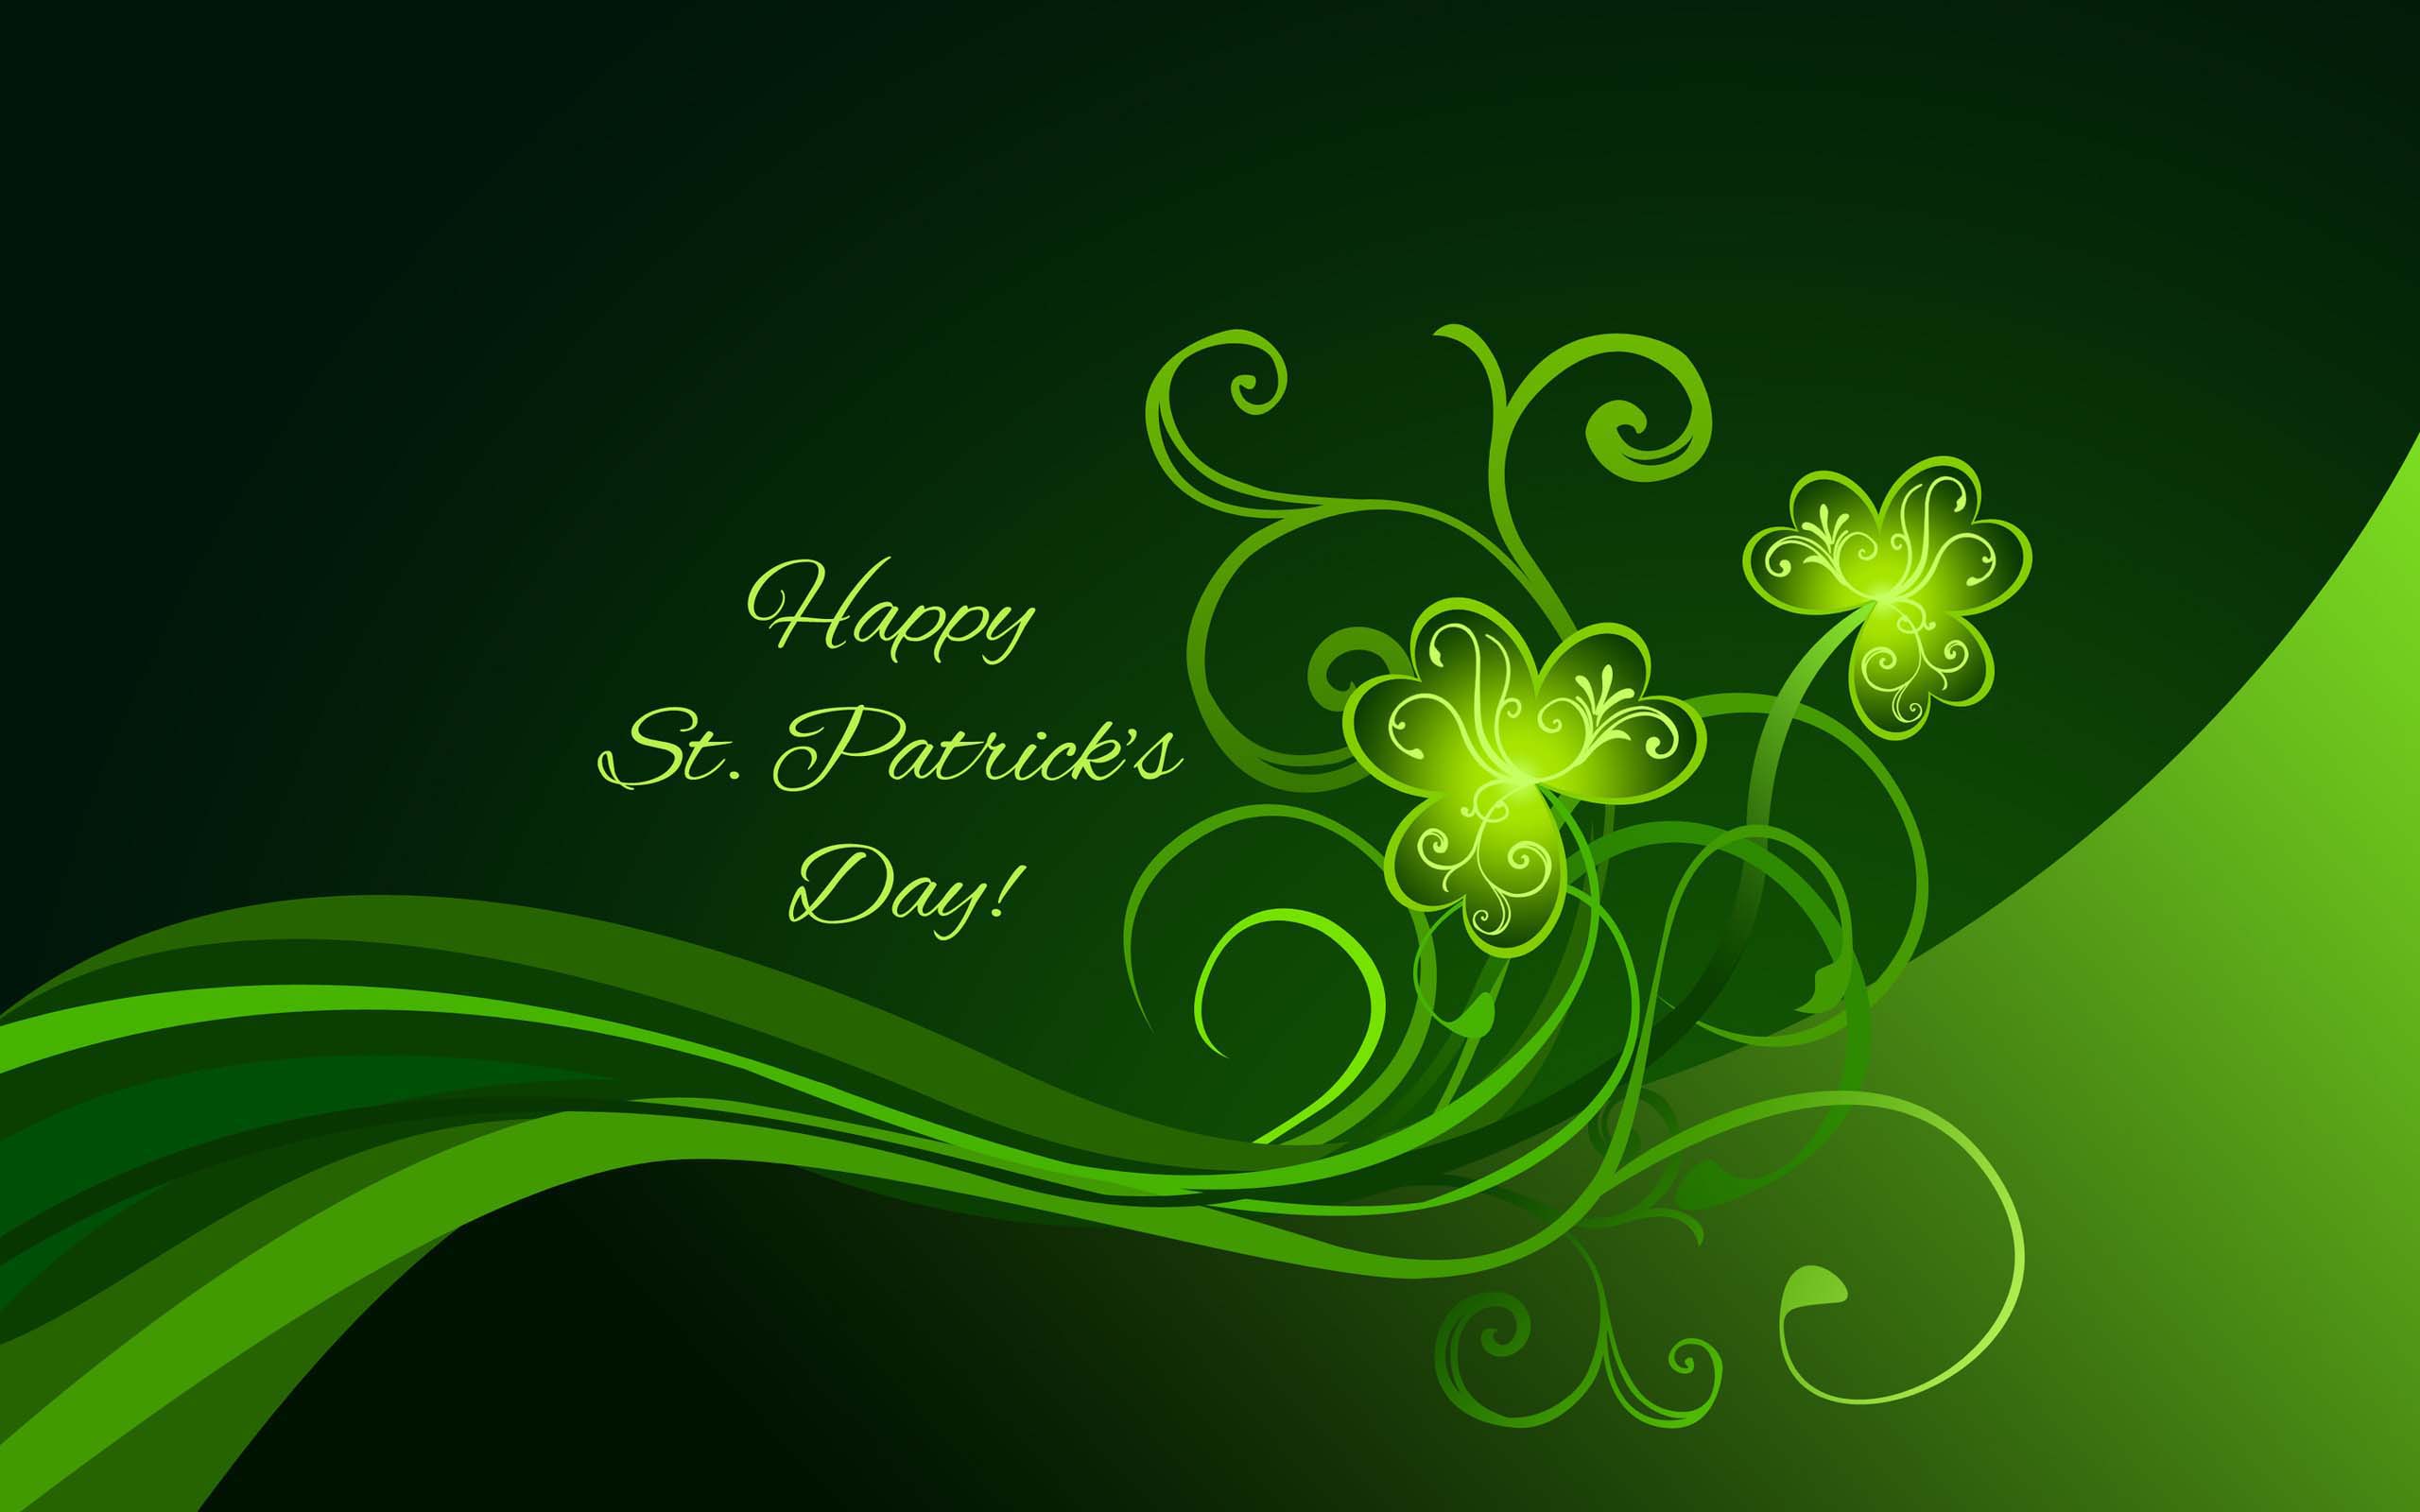 Happy St. Patrick's Day 2016 Pictures Wallpaper - USA Festival ...